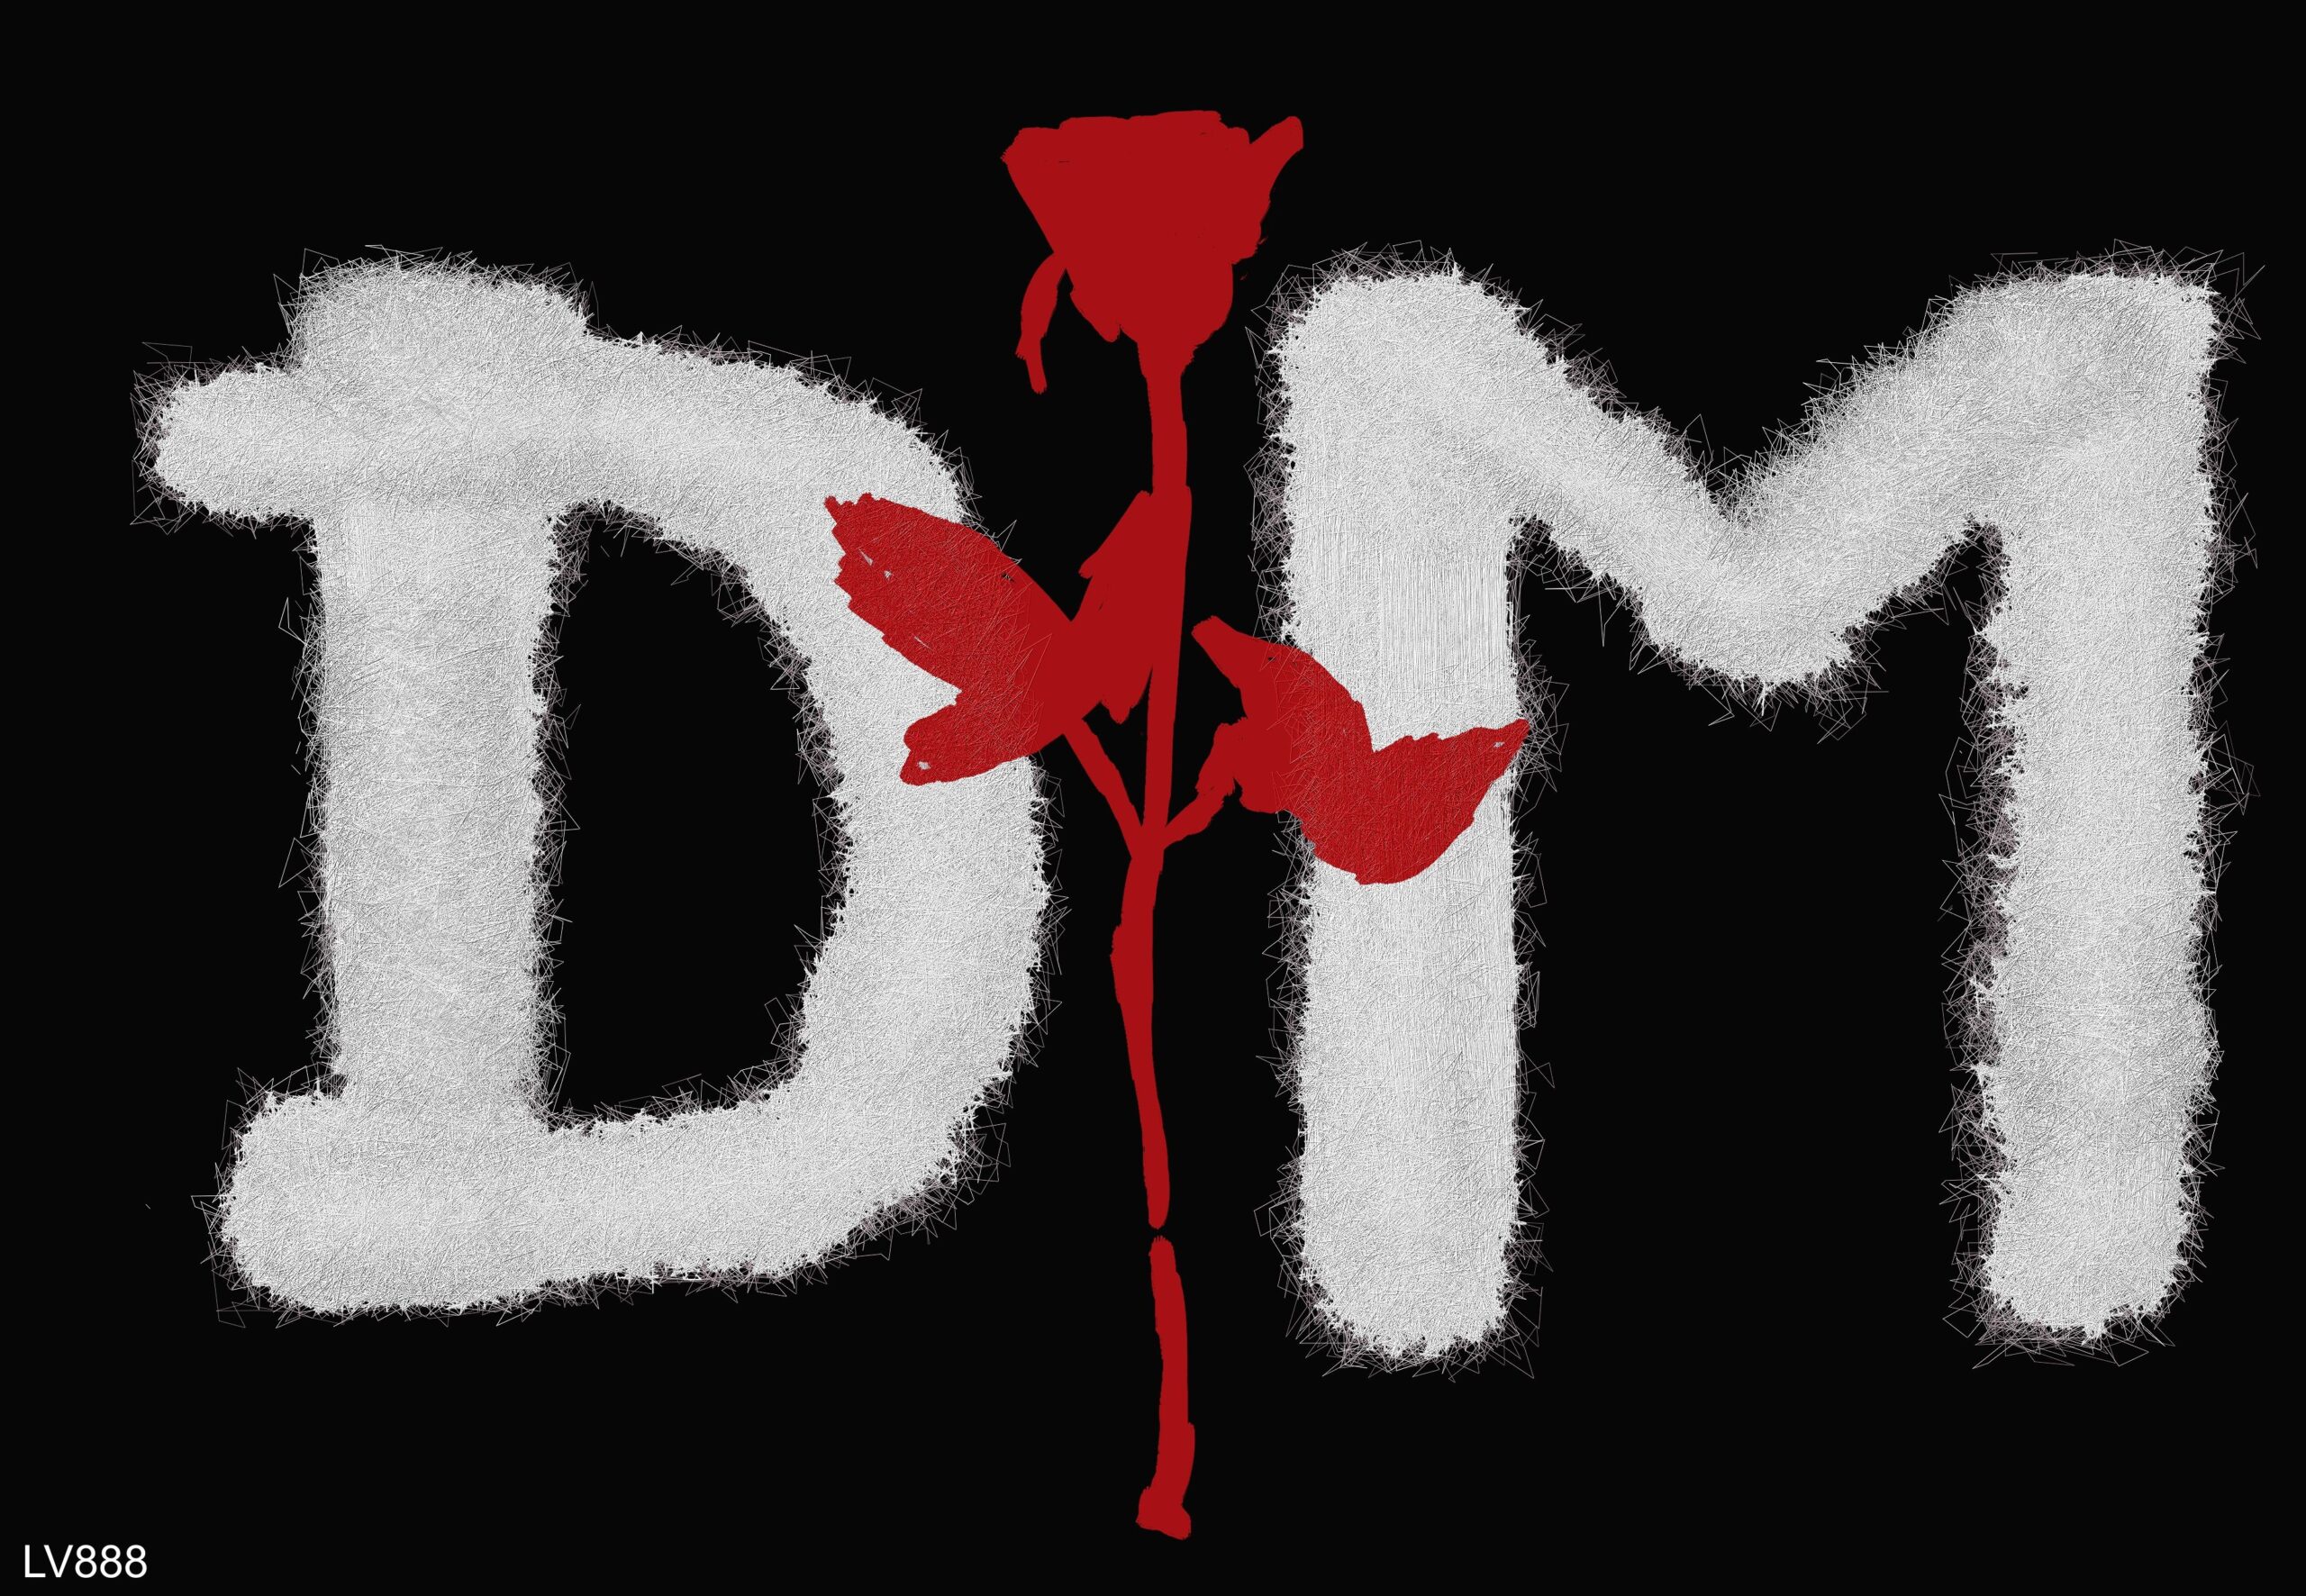 Depeche Mode on X: Ghosts Again, the first song off of Depeche Mode's new  studio album Memento Mori, is out now.    / X